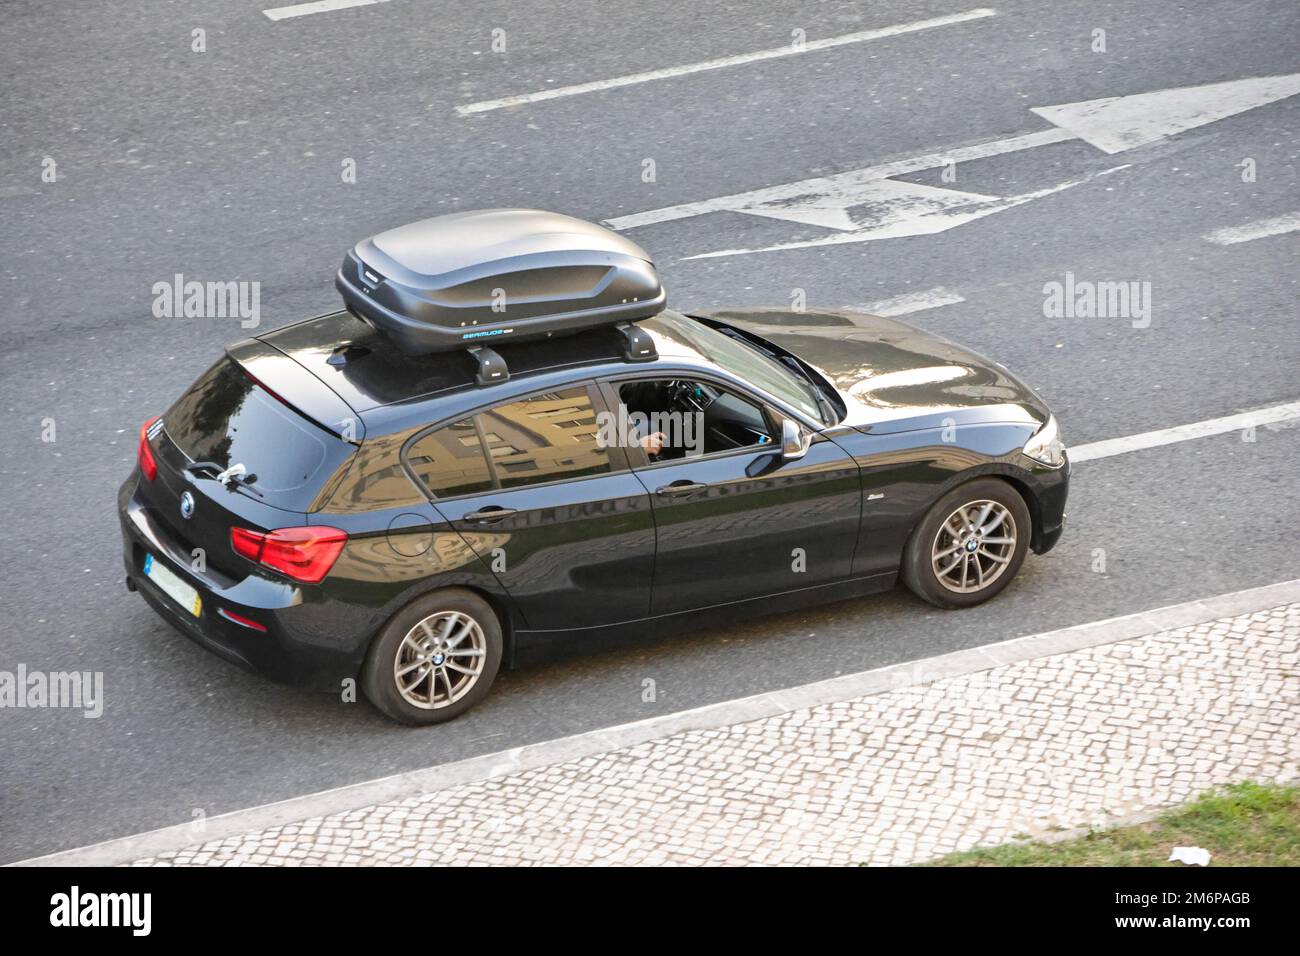 Vehicle from the manufacturer BMW with roof box to carry more cargo Stock  Photo - Alamy